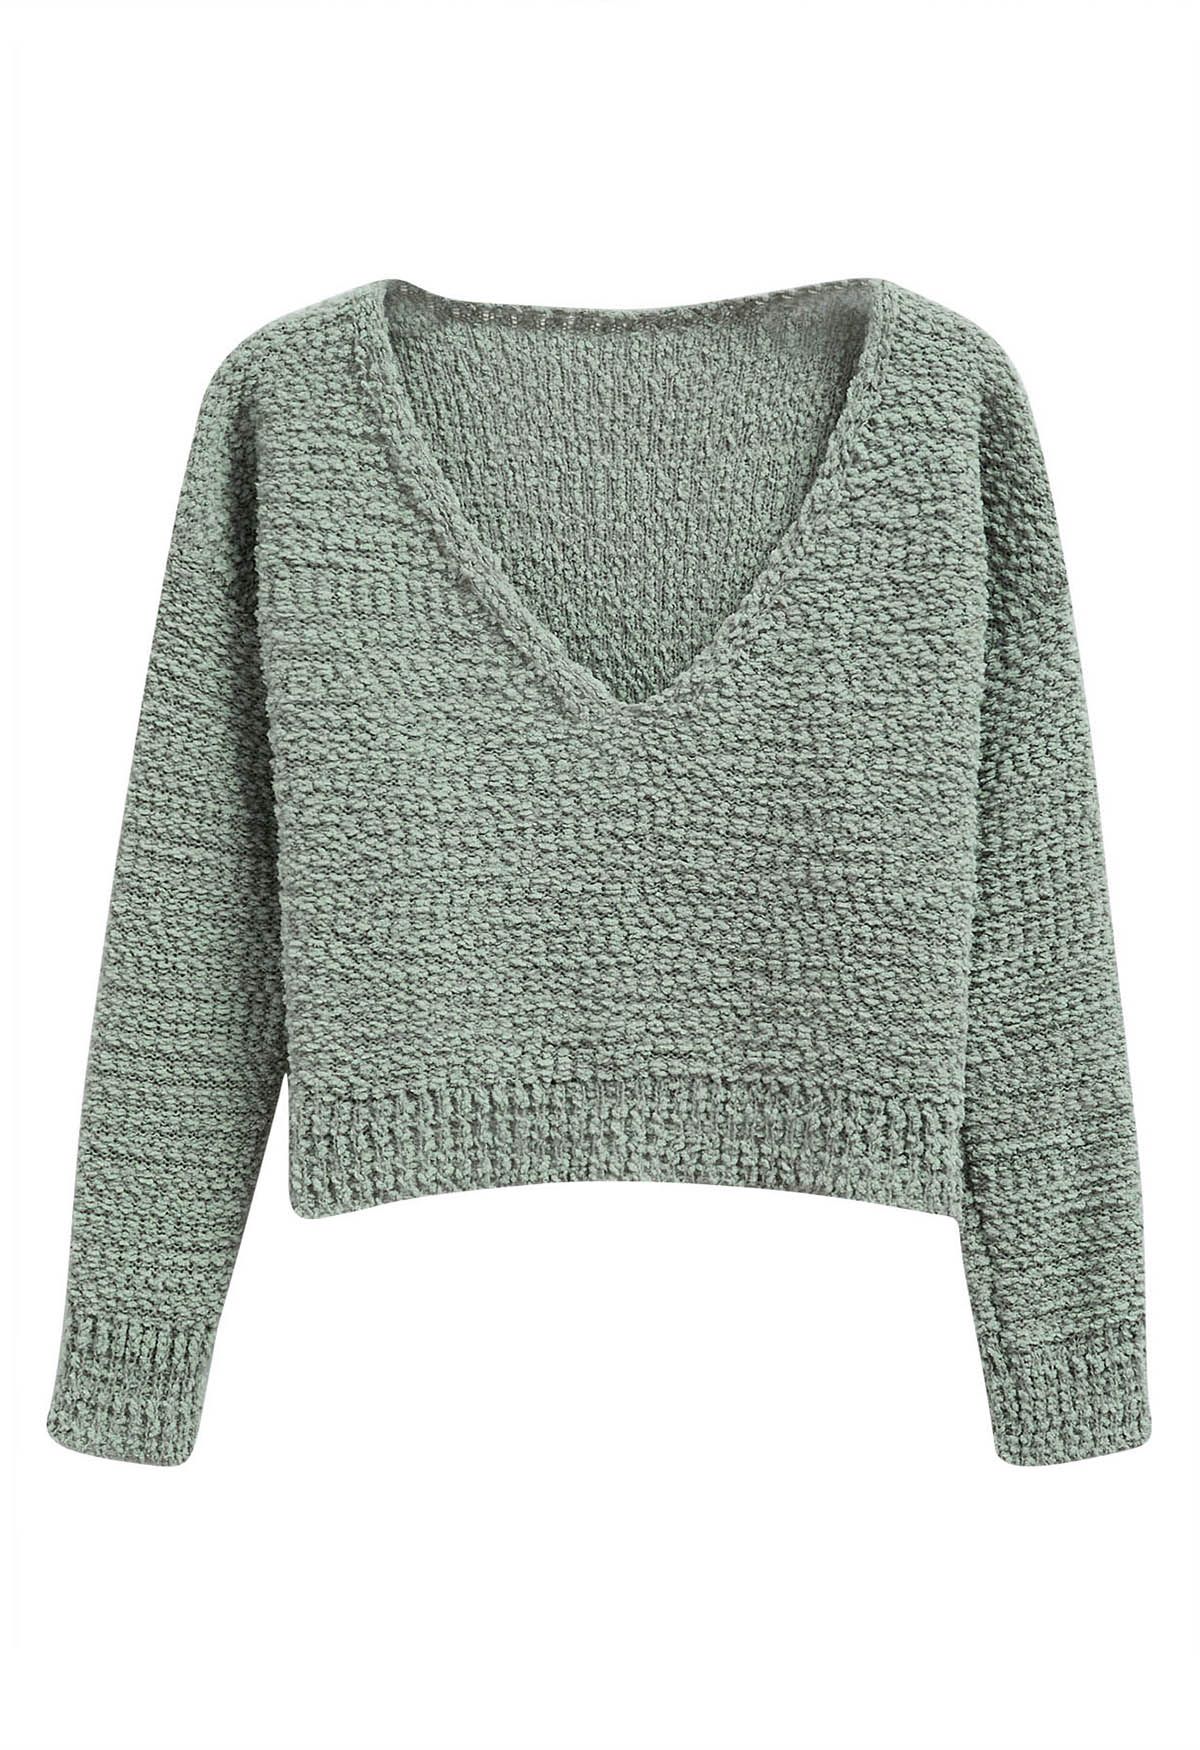 V-Neck Comfy Knit Sweater in Pea Green - Retro, Indie and Unique Fashion